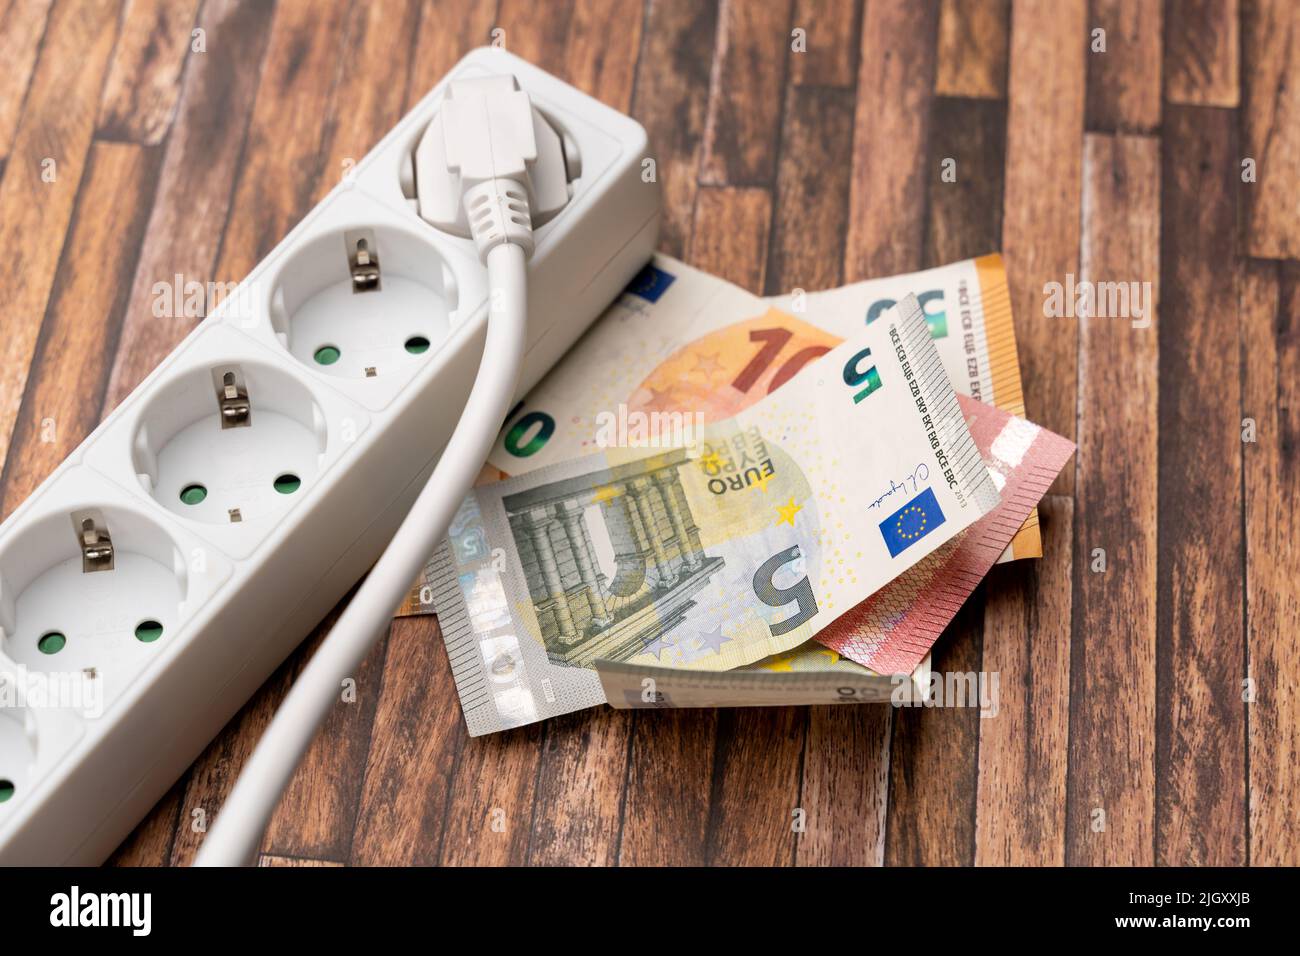 Euro banknotes next to a power socket. Symbolic image for a high electricity price. Increasing energy costs due to inflation effects. Multi socket Stock Photo